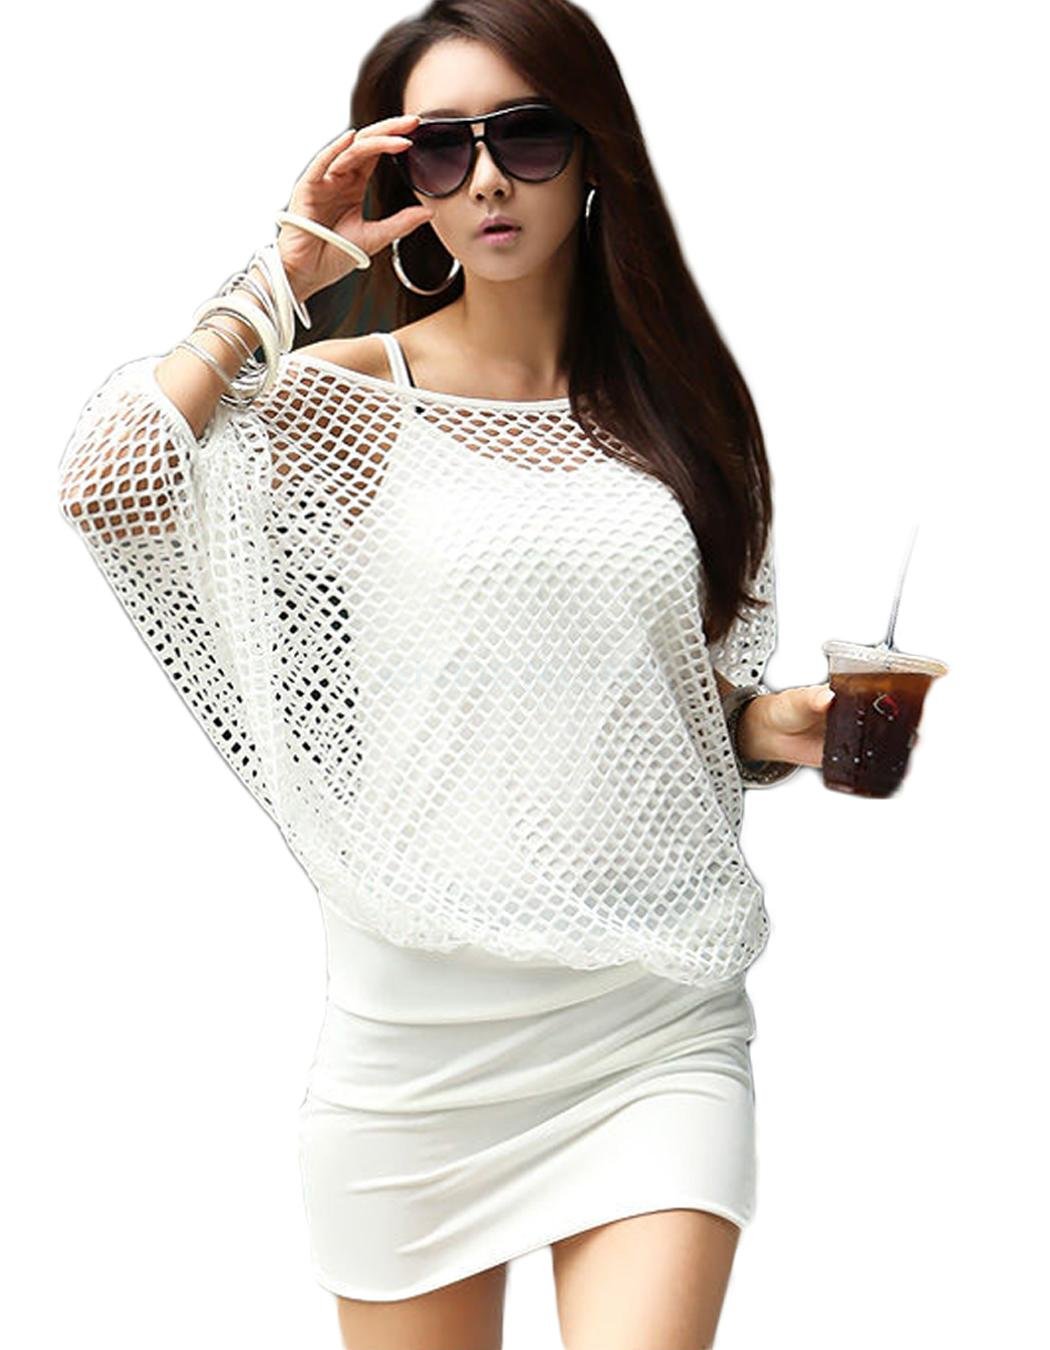 unknown Fashion Women's Hollow Sexy Dress Ladies Summer Casual Party Mini Dress